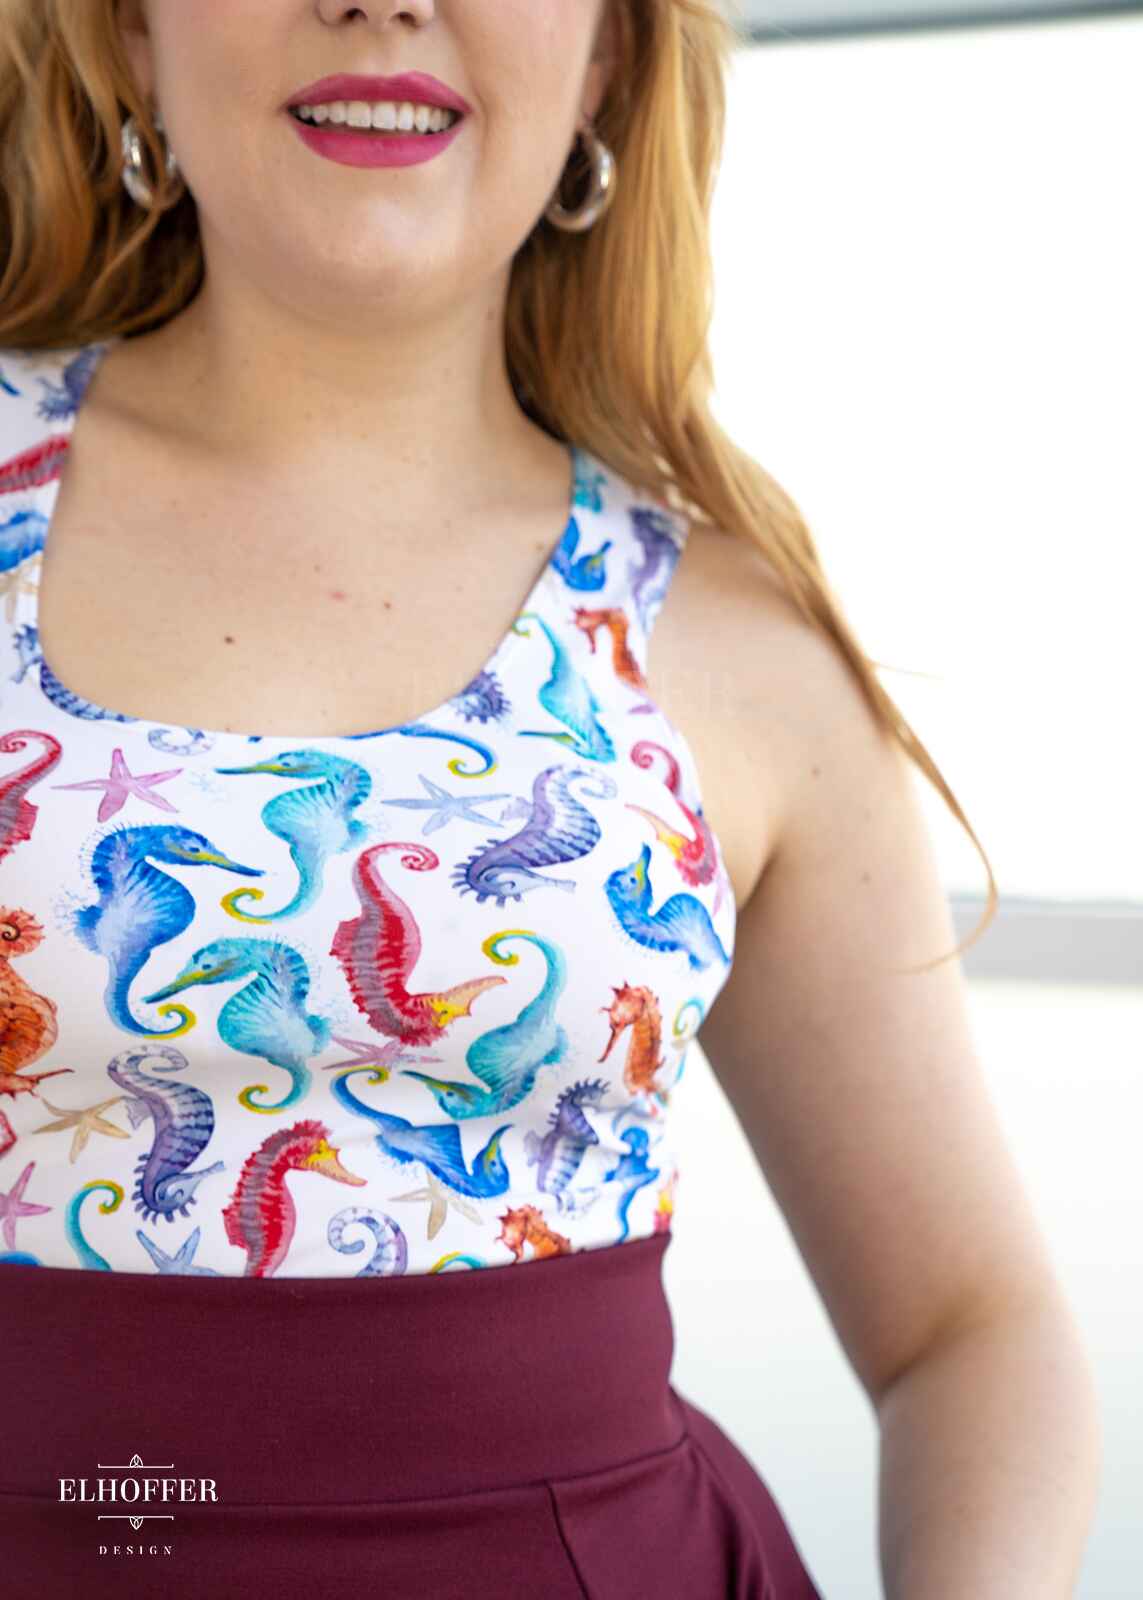 A close up of seahorse patten on the crop top.